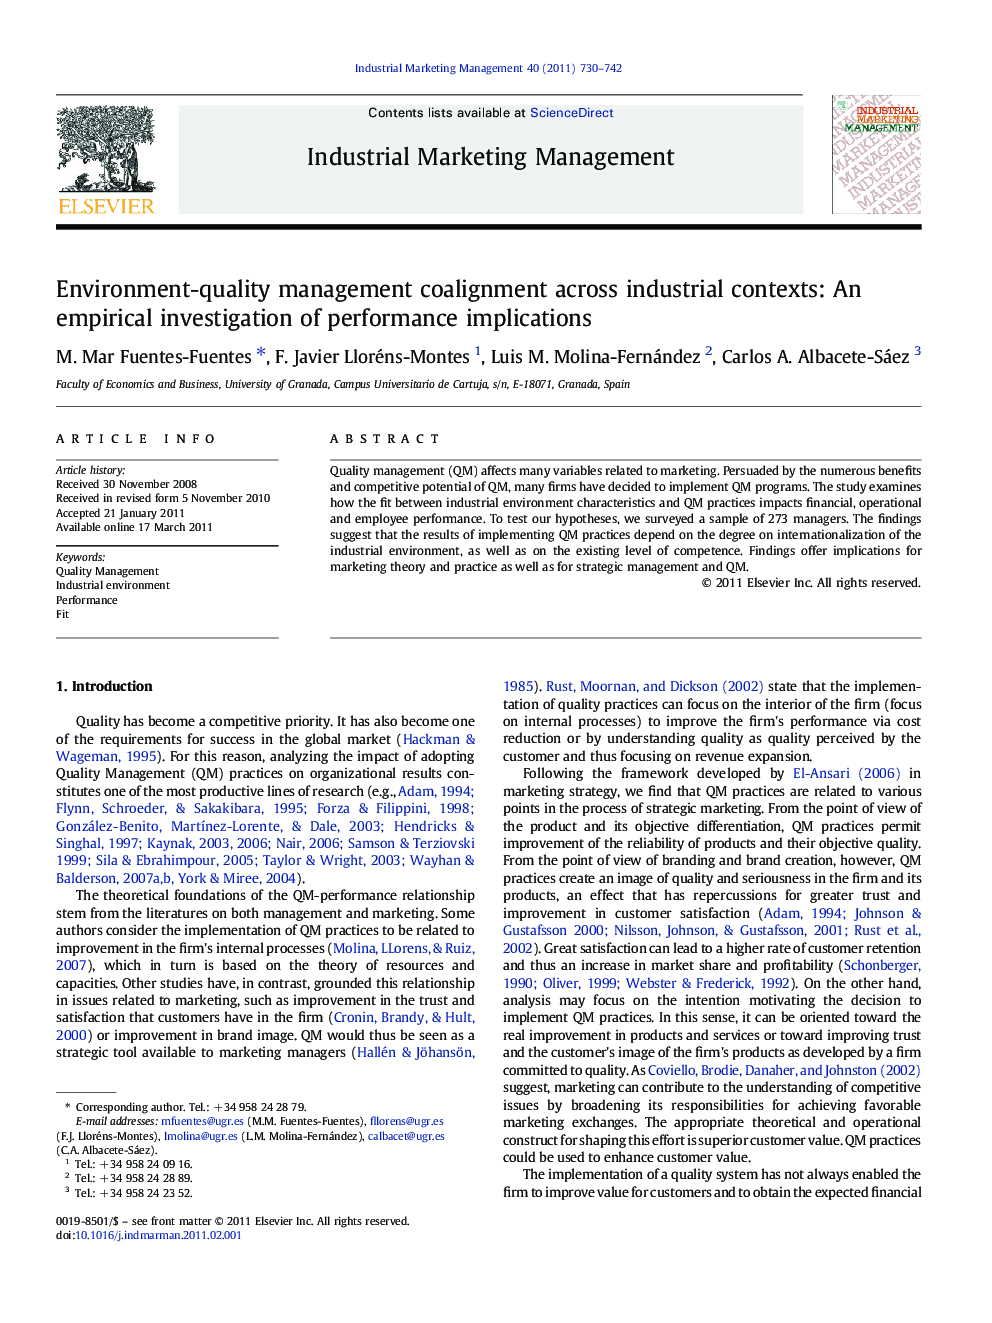 Environment-quality management coalignment across industrial contexts: An empirical investigation of performance implications